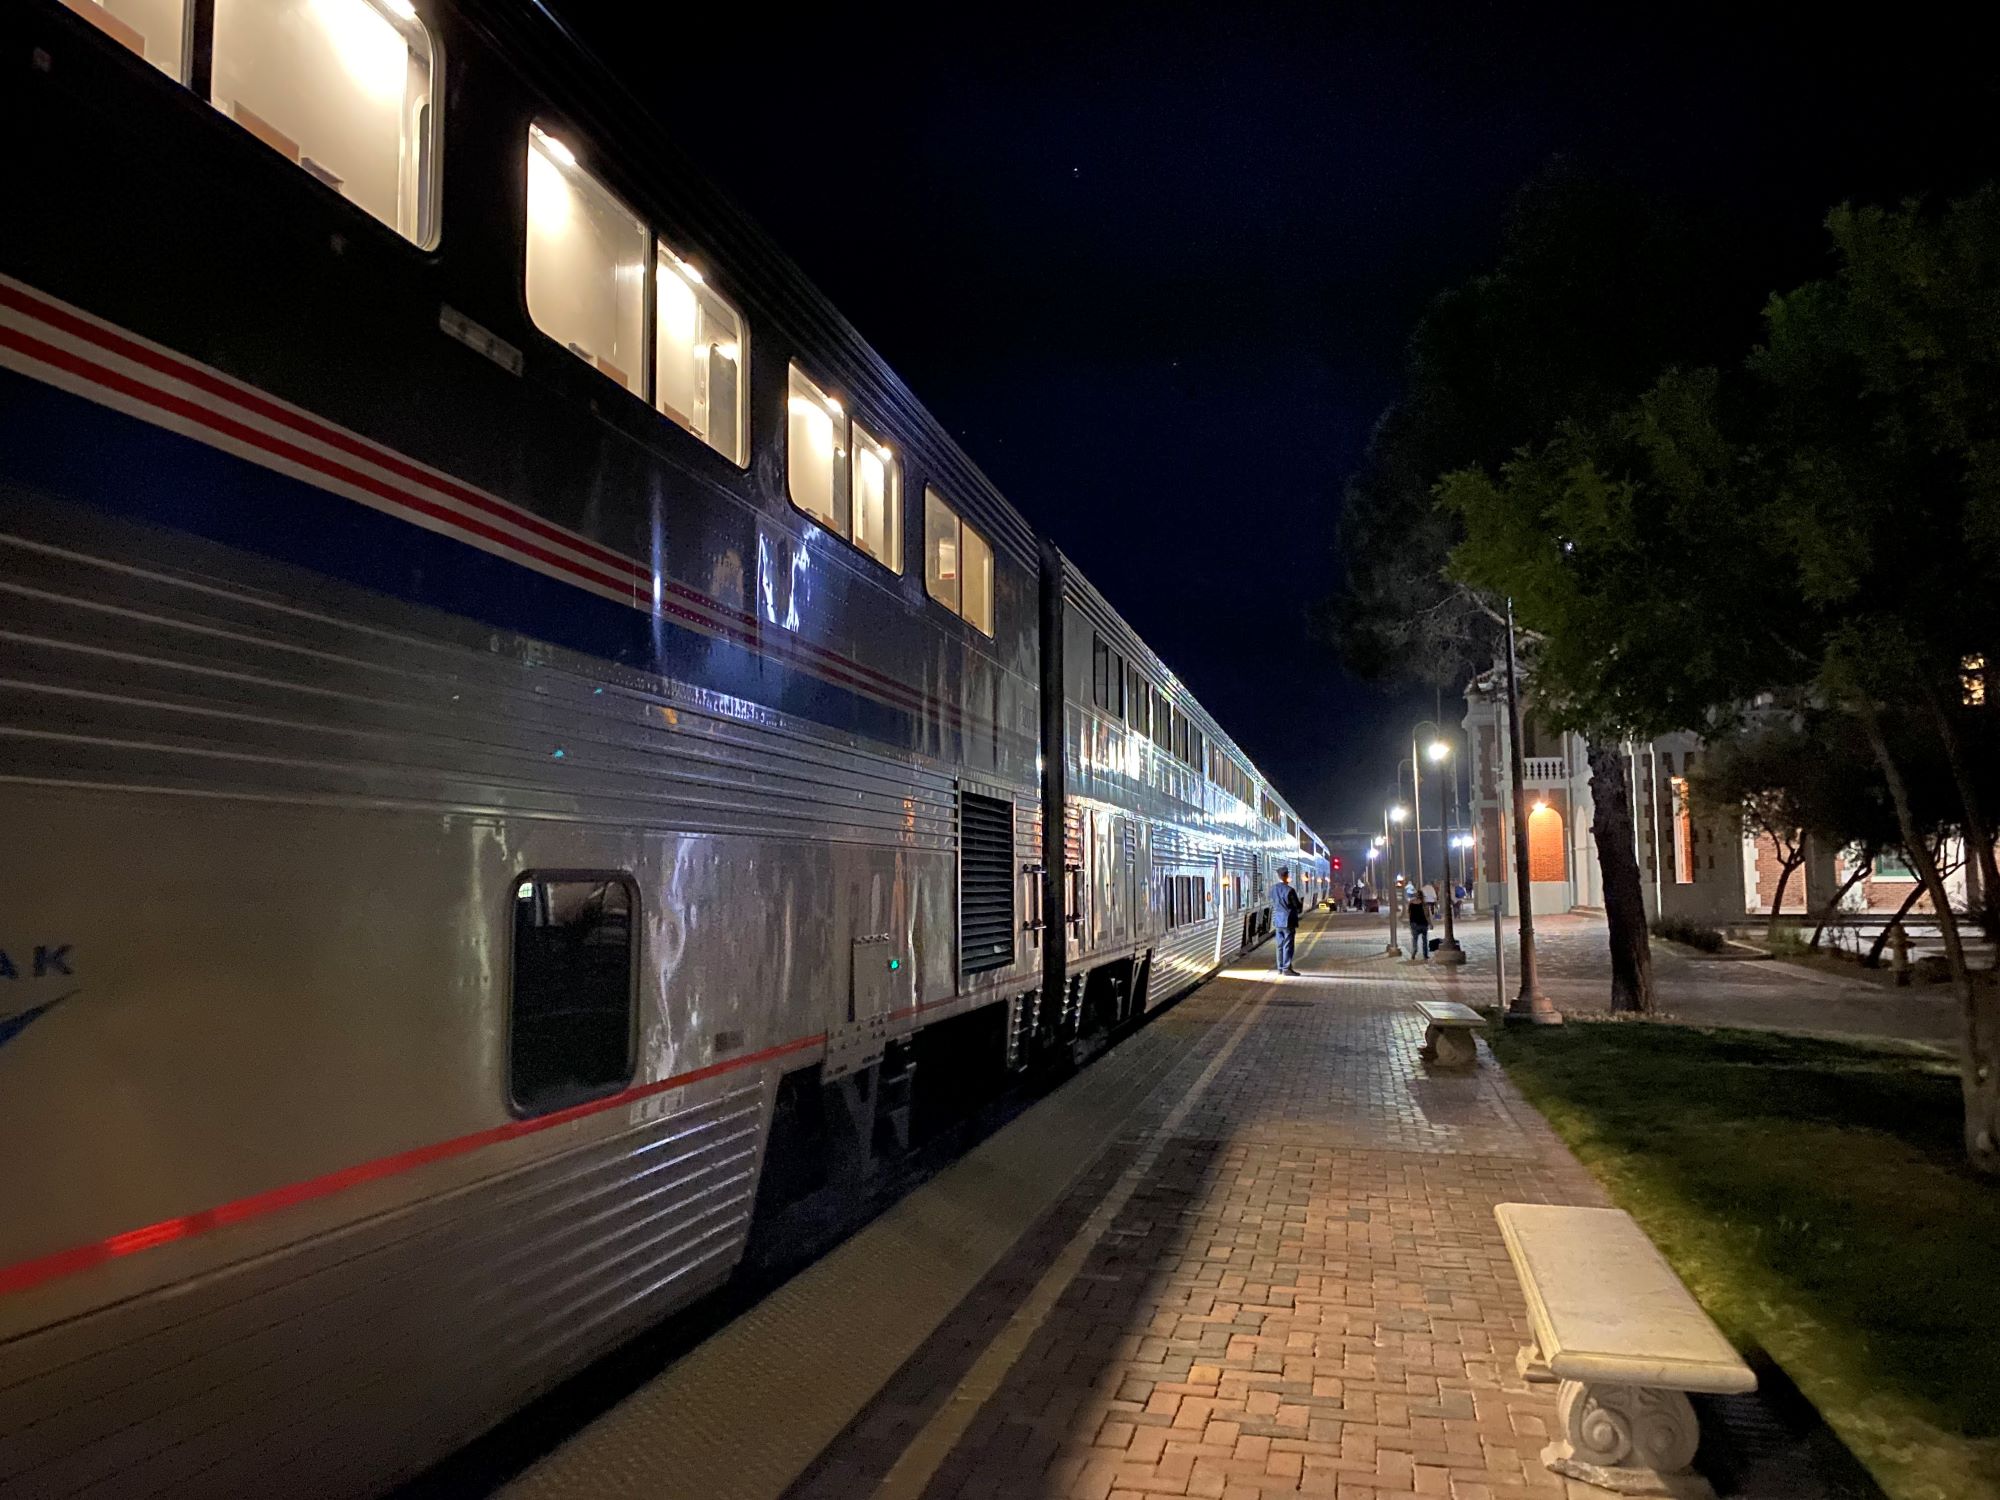 3 days on the Southwest Chief | Day 1: Los Angeles, CA to Flagstaff, AZ